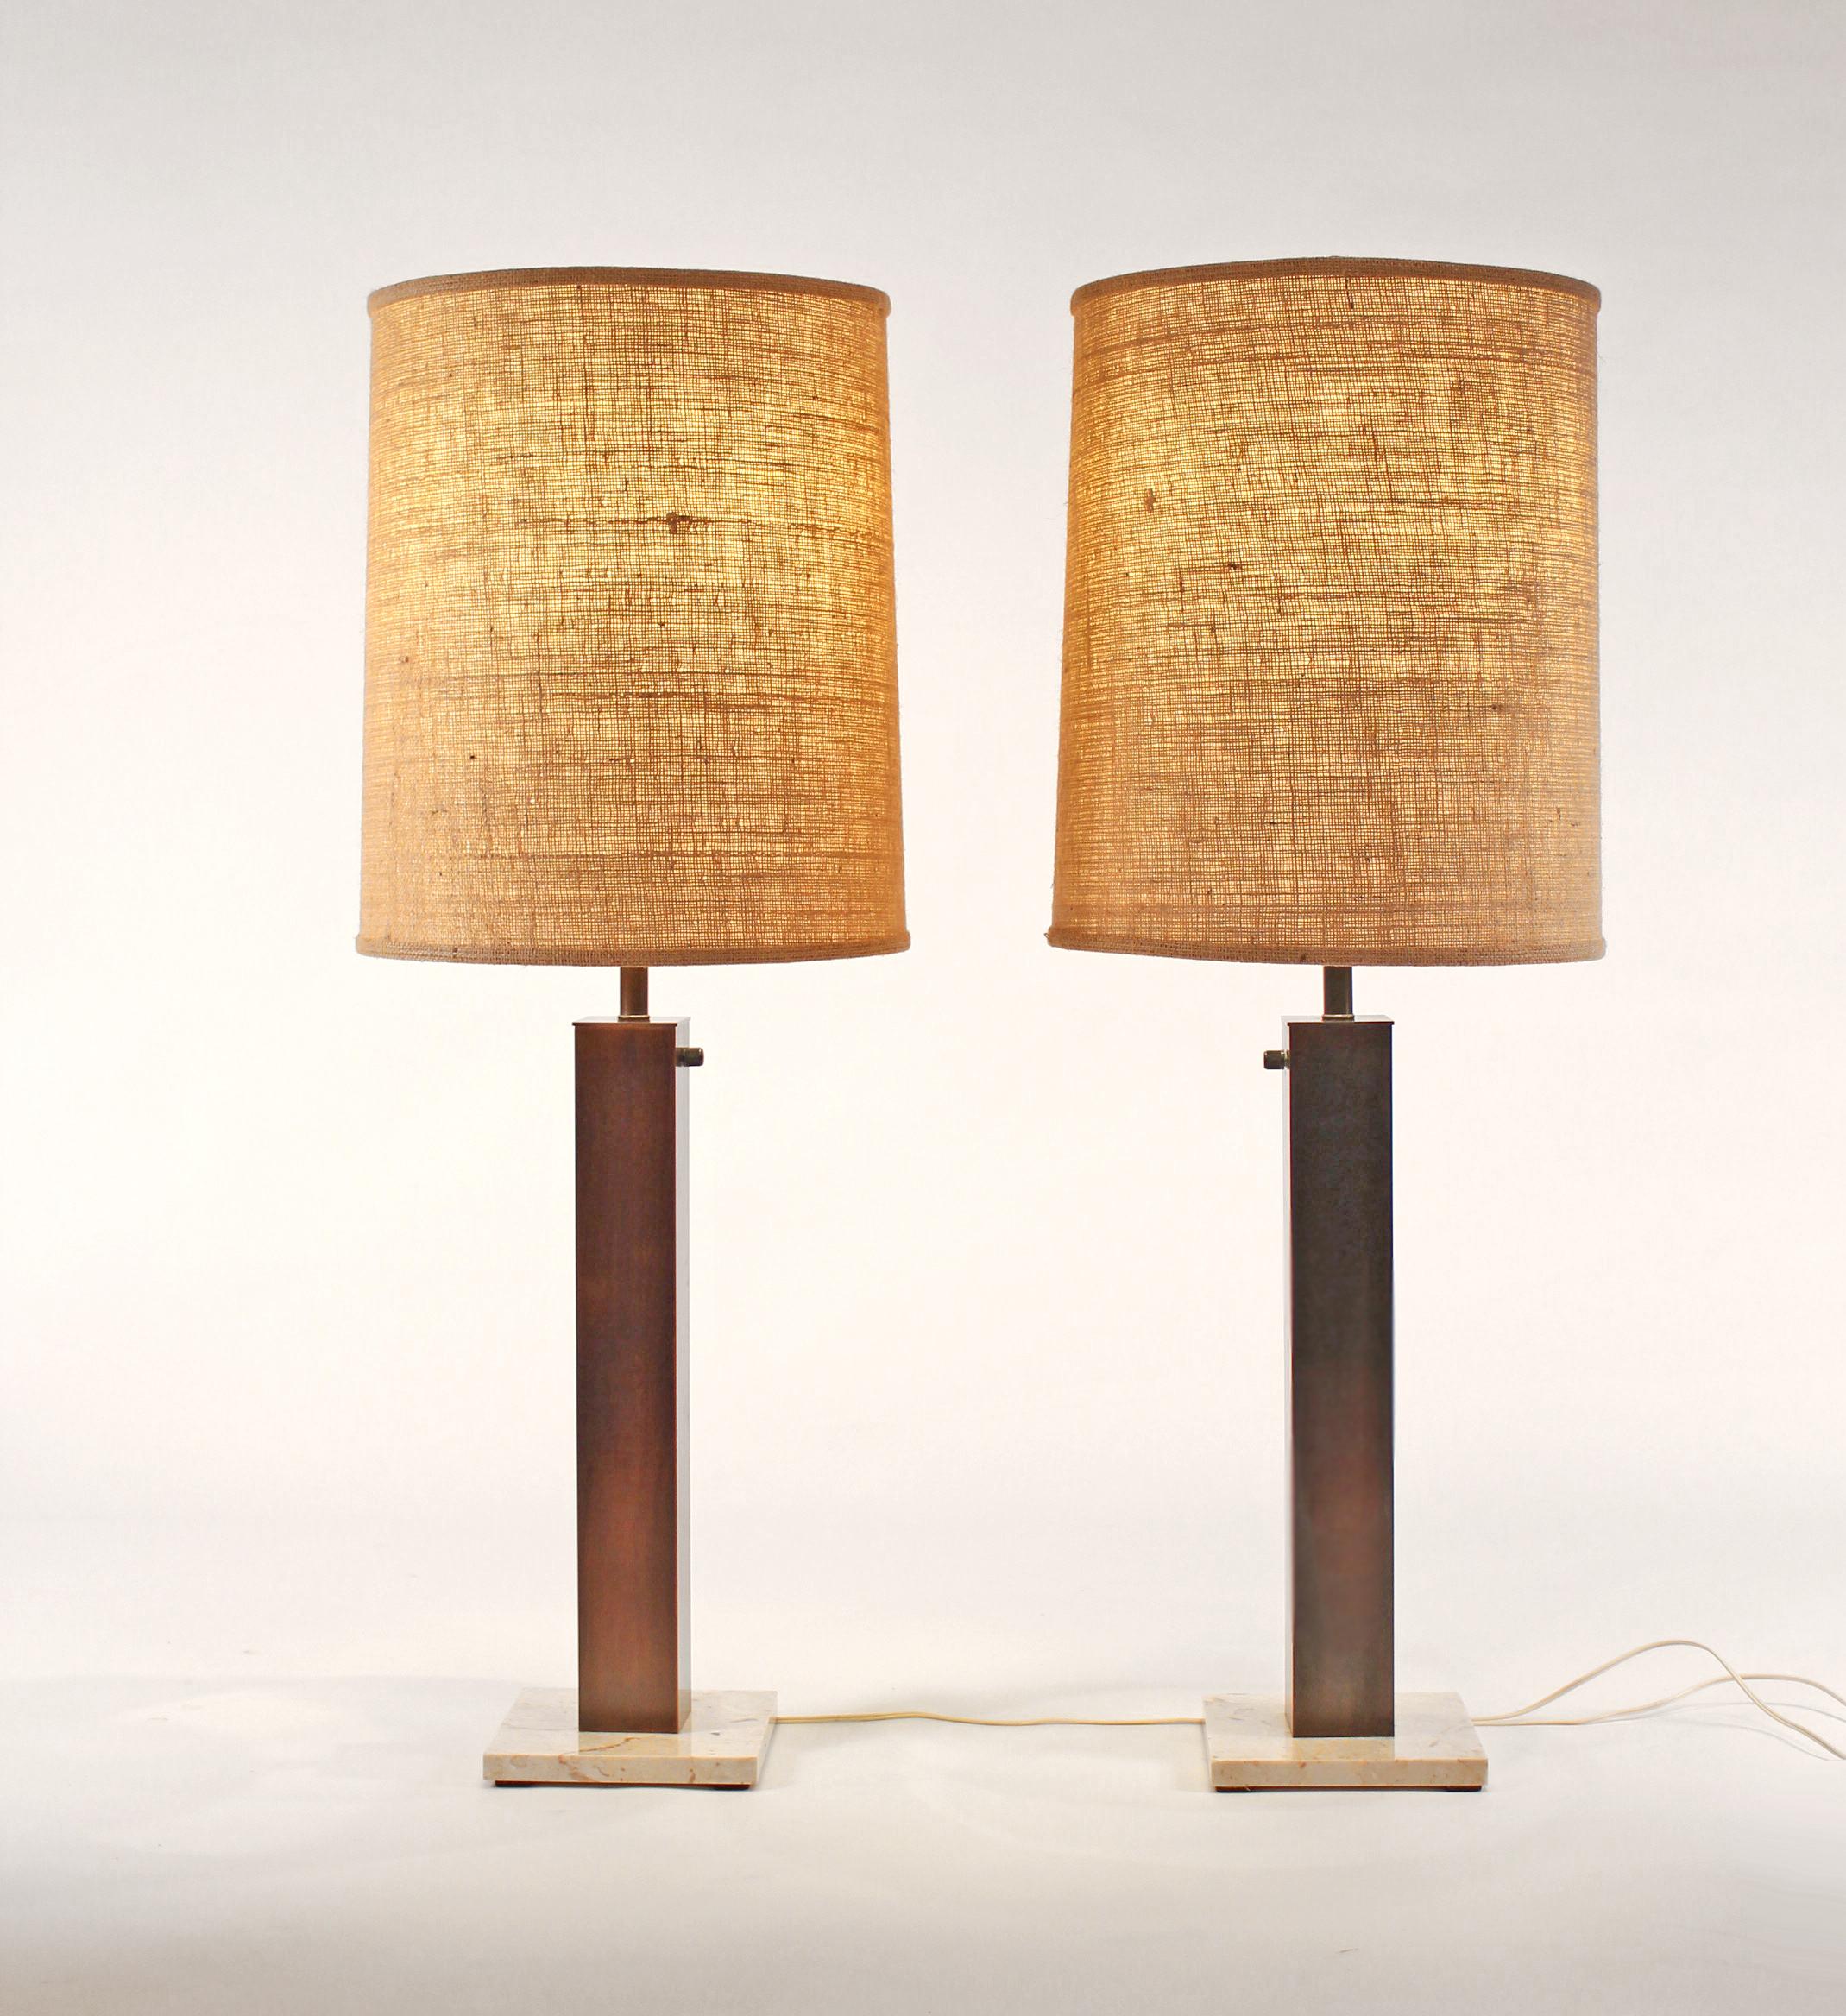 20th Century Pair of 1960s Oil Rubbed Bronze and Travertine Table Lamps by Nessen